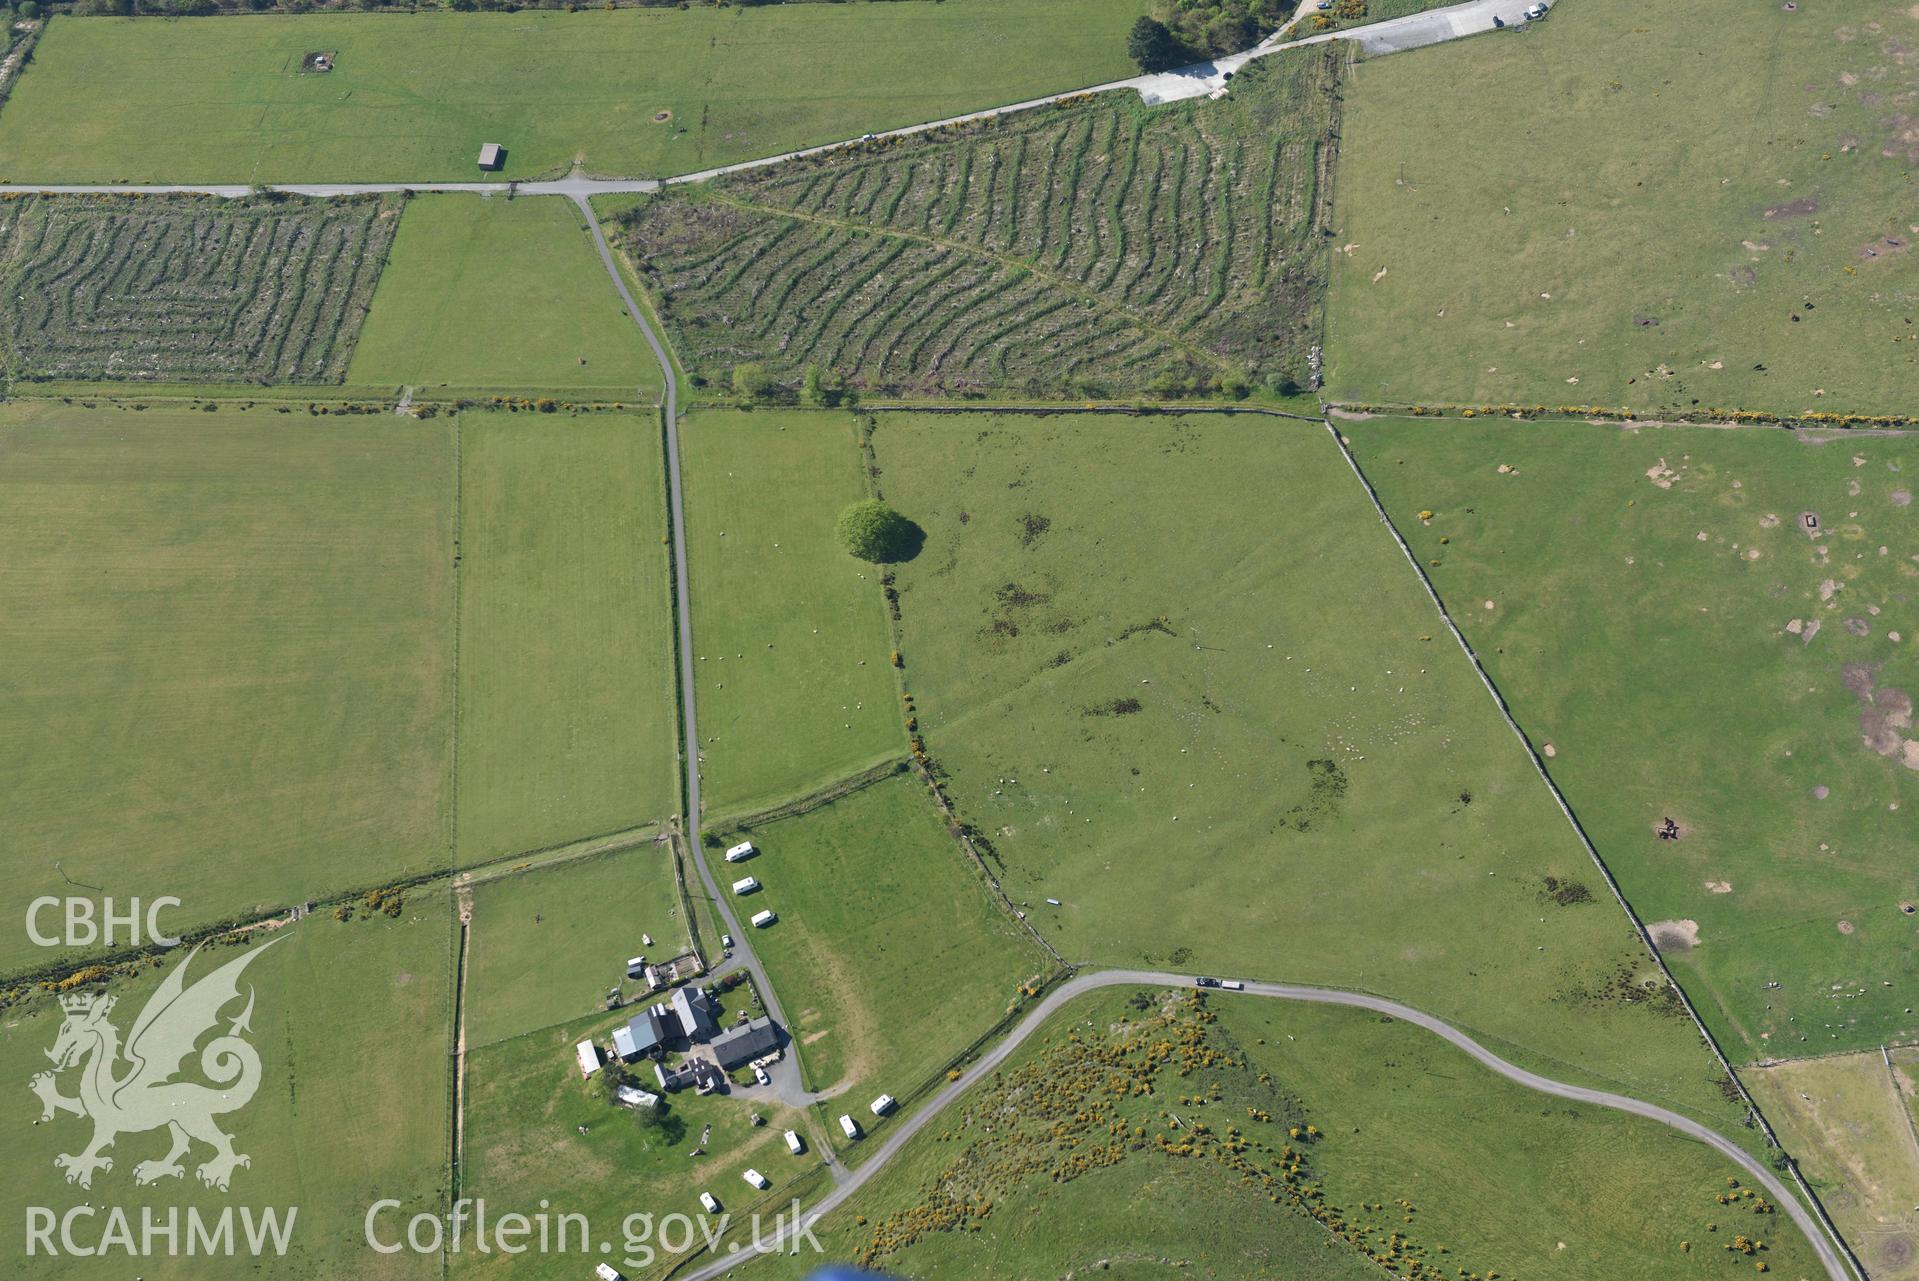 Aerial photography of the Tanforhesgan enclosure taken on 3rd May 2017.  Baseline aerial reconnaissance survey for the CHERISH Project. ? Crown: CHERISH PROJECT 2017. Produced with EU funds through the Ireland Wales Co-operation Programme 2014-2020. All material made freely available through the Open Government Licence.